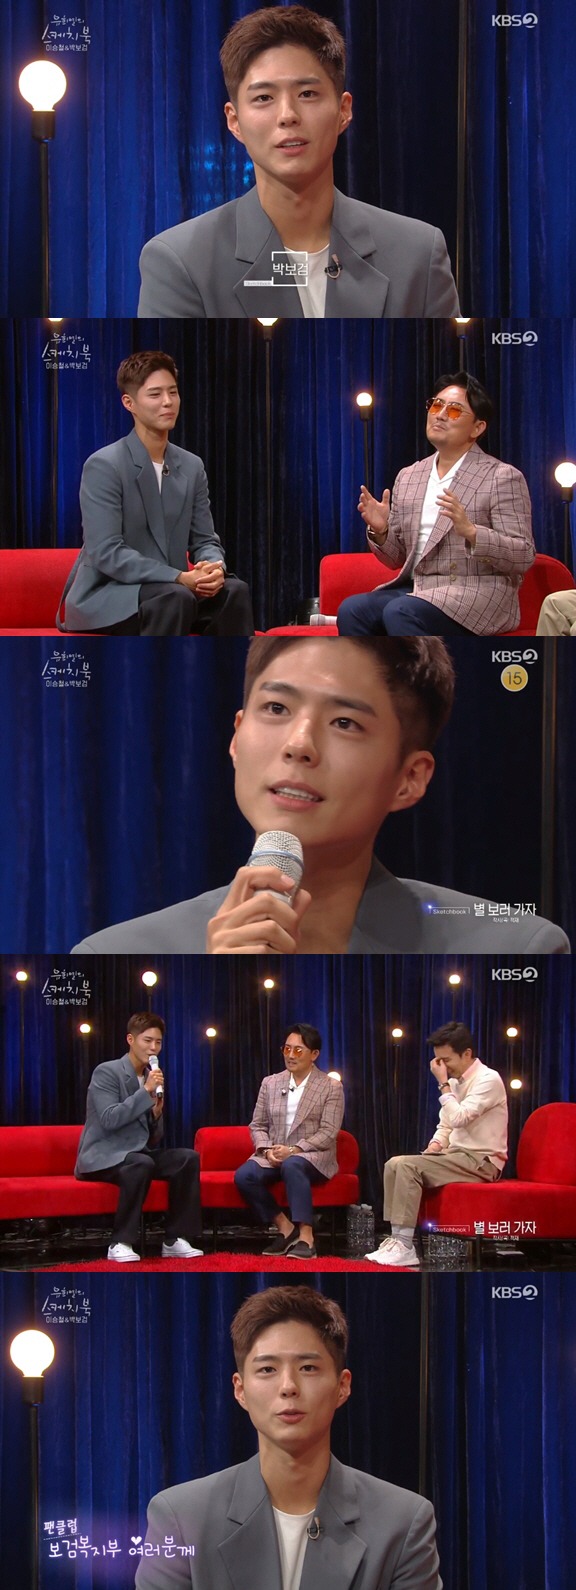 You Hee-yeols Sketchbook Park Bo-gum showed off his level piano performance and singing skills.She has also emanated the charm of the castle, which captures the girl as well as You Hee-yeol and Lee Seung-cheol.Actor Park Bo-gum appeared on KBS 2TV You Hee-yeols Sketchbook broadcast on the 20th, and gave a special stage from piano performance to song.Lee Seung-cheol and Park Bo-gum, who have been linked to the singer and music video protagonist in the webtoon Moonlight Sculptor OST I Love You Much released in January this year, prepared a special stage that can only be seen in You Hee-yeols Sketchbook.Park Bo-gum took on the piano accompaniment of I love you a lot and presented a perfect breath with Lee Seung-cheol and presented the river and the river.MC You Hee-yeol admired Park Bo-gums level piano performance, saying, I was surprised to hit it so perfectly. I smiled at the end of the smile, but my heart rattled.You Hee-yeol then asked for another song, saying, I did not know that I was playing the piano so well. Park Bo-gum played Lee Seung-cheols West Sky and Toys Good Man and attracted attention.He also played Chopstick March with You Hee-yeol and completed a sweet harmony.You Hee-yeols Sketchbook is a favorite Friday night, Park Bo-gum said, Your smile You Hee-yeol tickled my heart.I did not forget it, he said, making MC You Hee-yeol happy.Lee Seung-cheol, who first met Park Bo-gum on the day, praised Its hard to play with the band, but it was really good.Park Bo-gum said, Lee Seung-cheol has made this stage offer, and it is an honorable opportunity for me.But I was nervous and I fell asleep yesterday. I usually liked and admired Lee Seung-cheol, and I have never participated in a music video since my debut, but I was given a chance, he said.Park Bo-gum also revealed his dream of becoming a singer: he dreamed of being a singer-songwriter before he made his debut as an actor, but he became an actor on the suggestion of his agency representative.However, Park Bo-gum went to graduate school as a new media music department and released Christmas songs last winter and showed his affection for music steadily.In addition, Park Bo-gum remade the Lets go to the stars of the loading last year and was attracting attention with pure tone.Lee Seung-cheol, who watched this, praised I like the pure voice; I pick these people at the audition, and the visual is so good.Park Bo-gum confessed, We are currently preparing for the project with the spring of antenna music. He made me look forward to the musician Park Bo-gum.But Park Bo-gum said, Do you have a singer plan? I do not have it yet. I am faithful to acting, but I want to meet with my fans musically.Finally, he told the fan club Bogeum Welfare Department, Thank you for always supporting me.At the end of the broadcast, Park Bo-gum was surprised to become You Hee-yeols Sketchbook MC according to You Hee-yeol proposal, Lets try 2MC by recalling memories of Music Bank in the past.The two introduced the next stage, Lee Seung-cheols Nobody else like that, which made everyone laugh with perfect sums from visuals to comments.